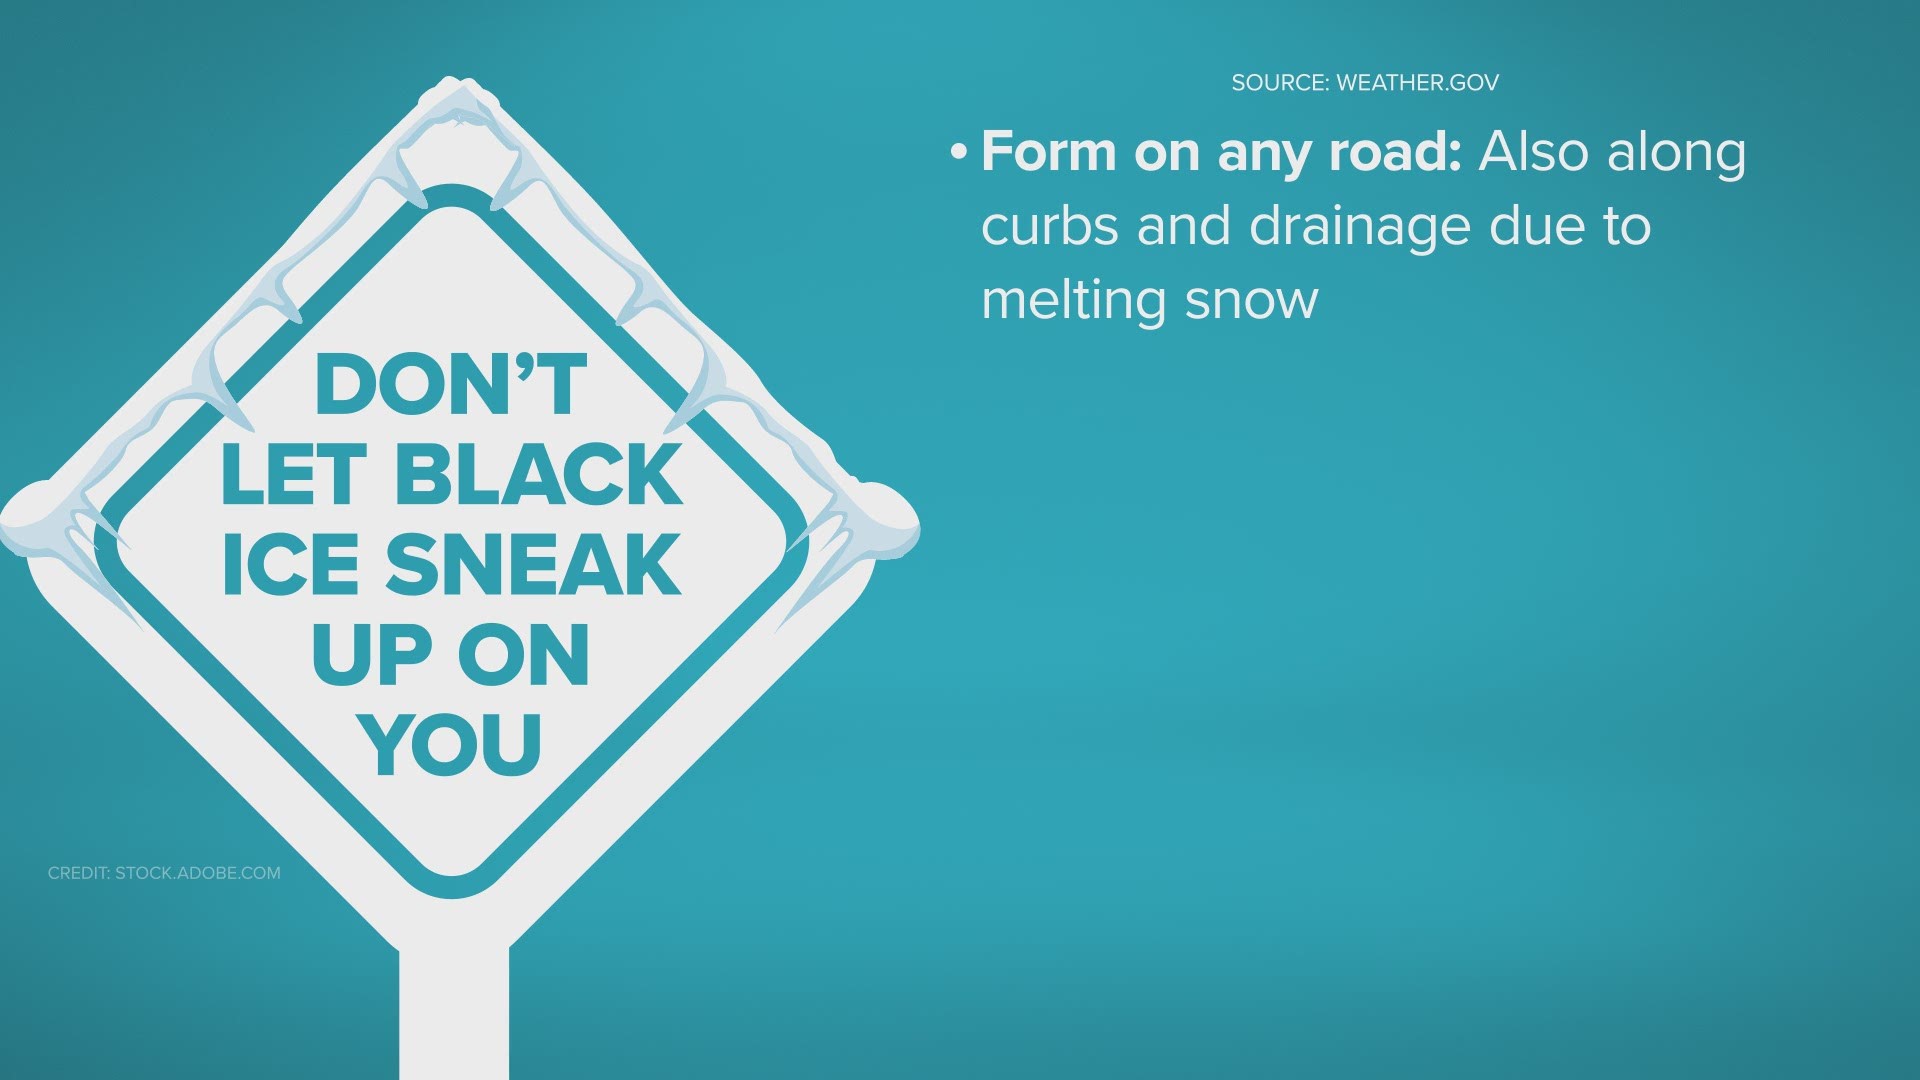 Be safe driving while roads may be frozen.